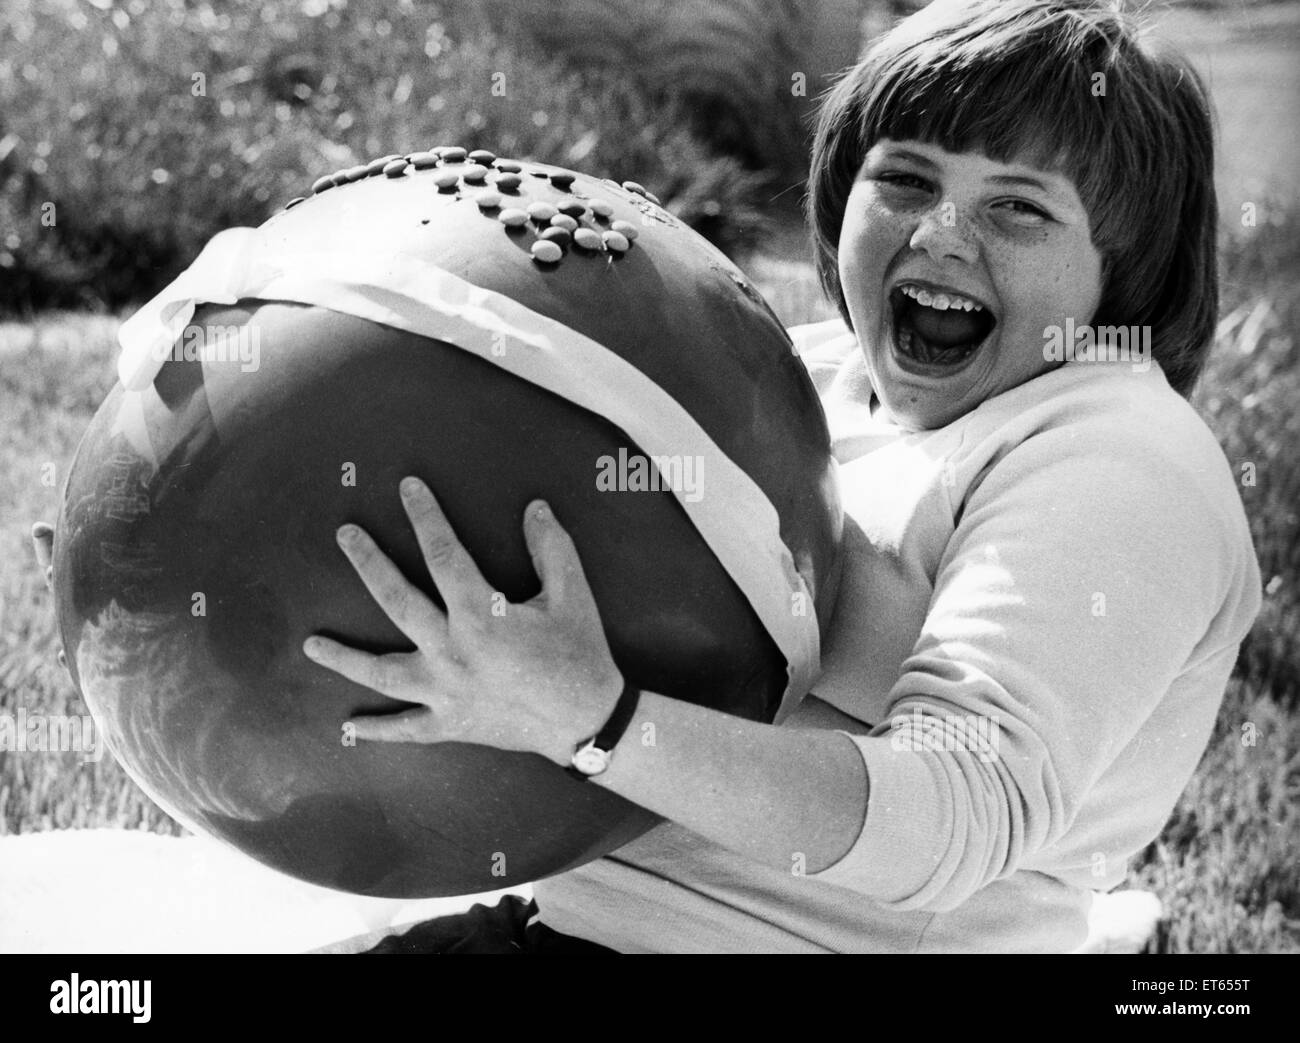 Lynn McGiven, pictured with her enormous prize, a large chocolate easter egg, after winning an Easter Card Colouring Competition, 18th April 1981. Stock Photo